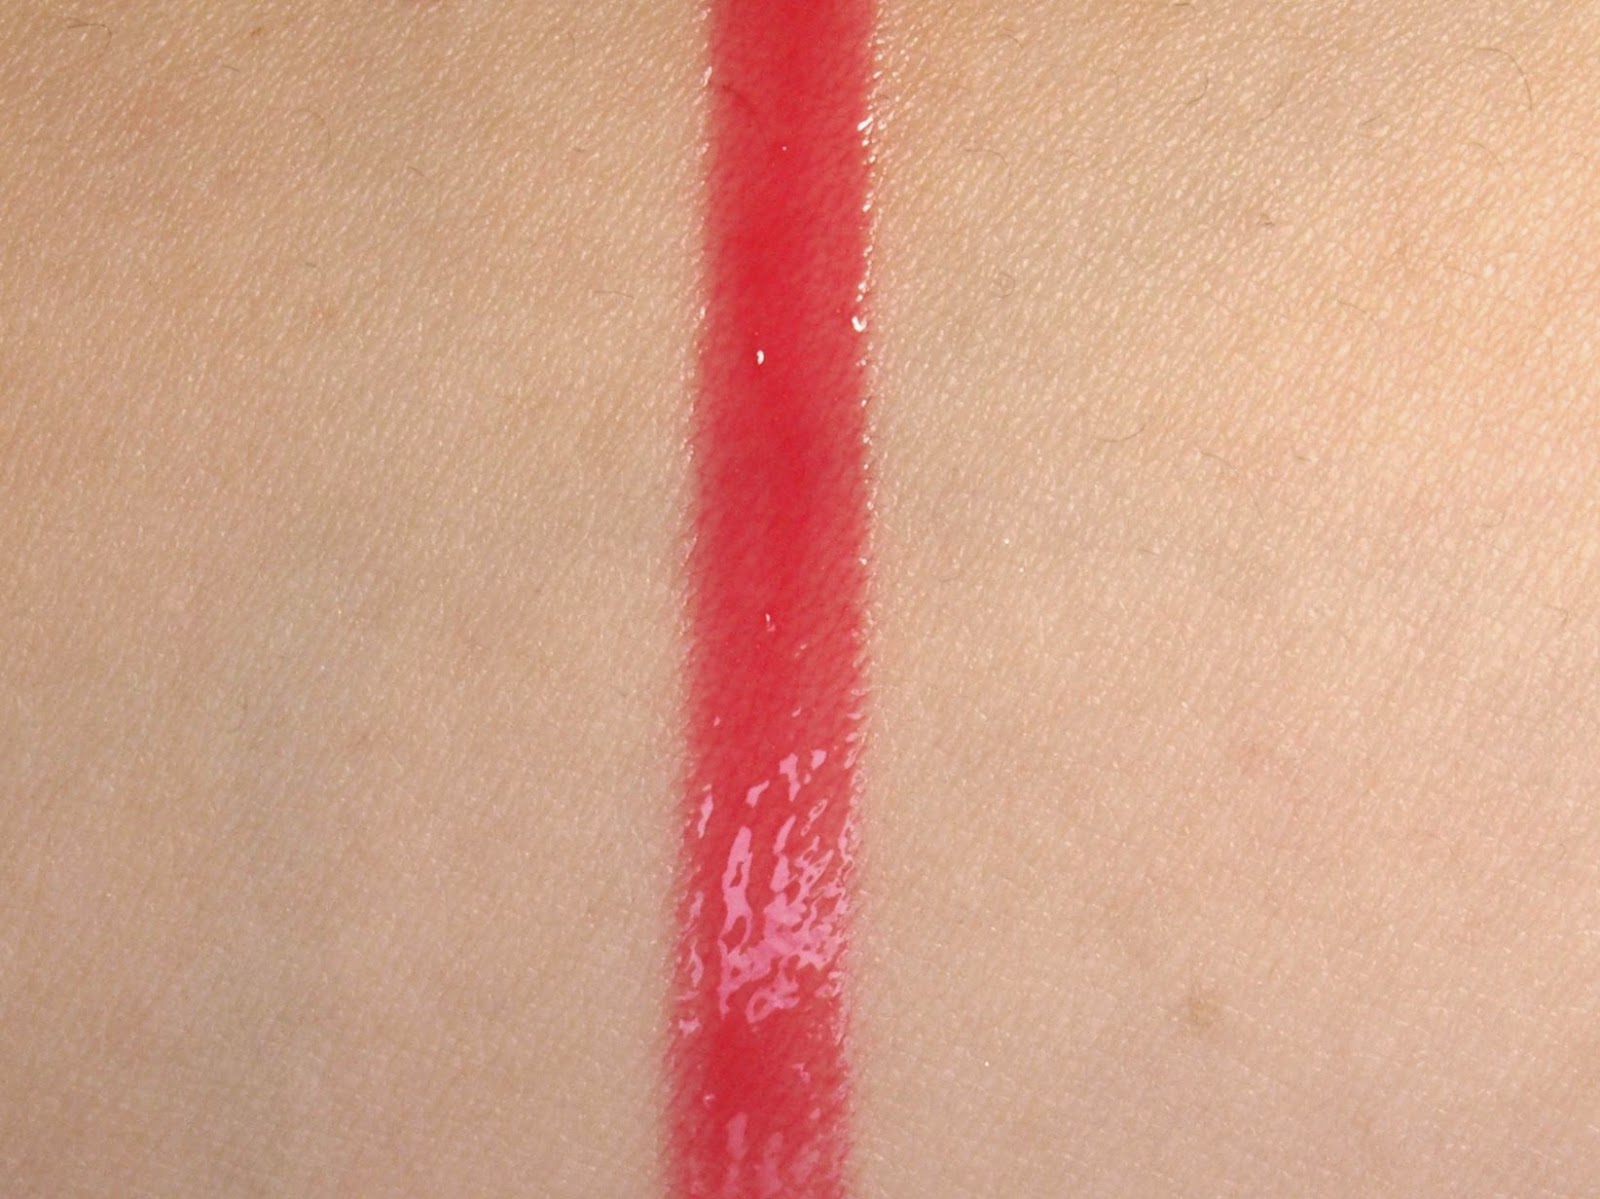 Smashbox Be Legendary Lip Gloss in "Azalea": Review and Swatches